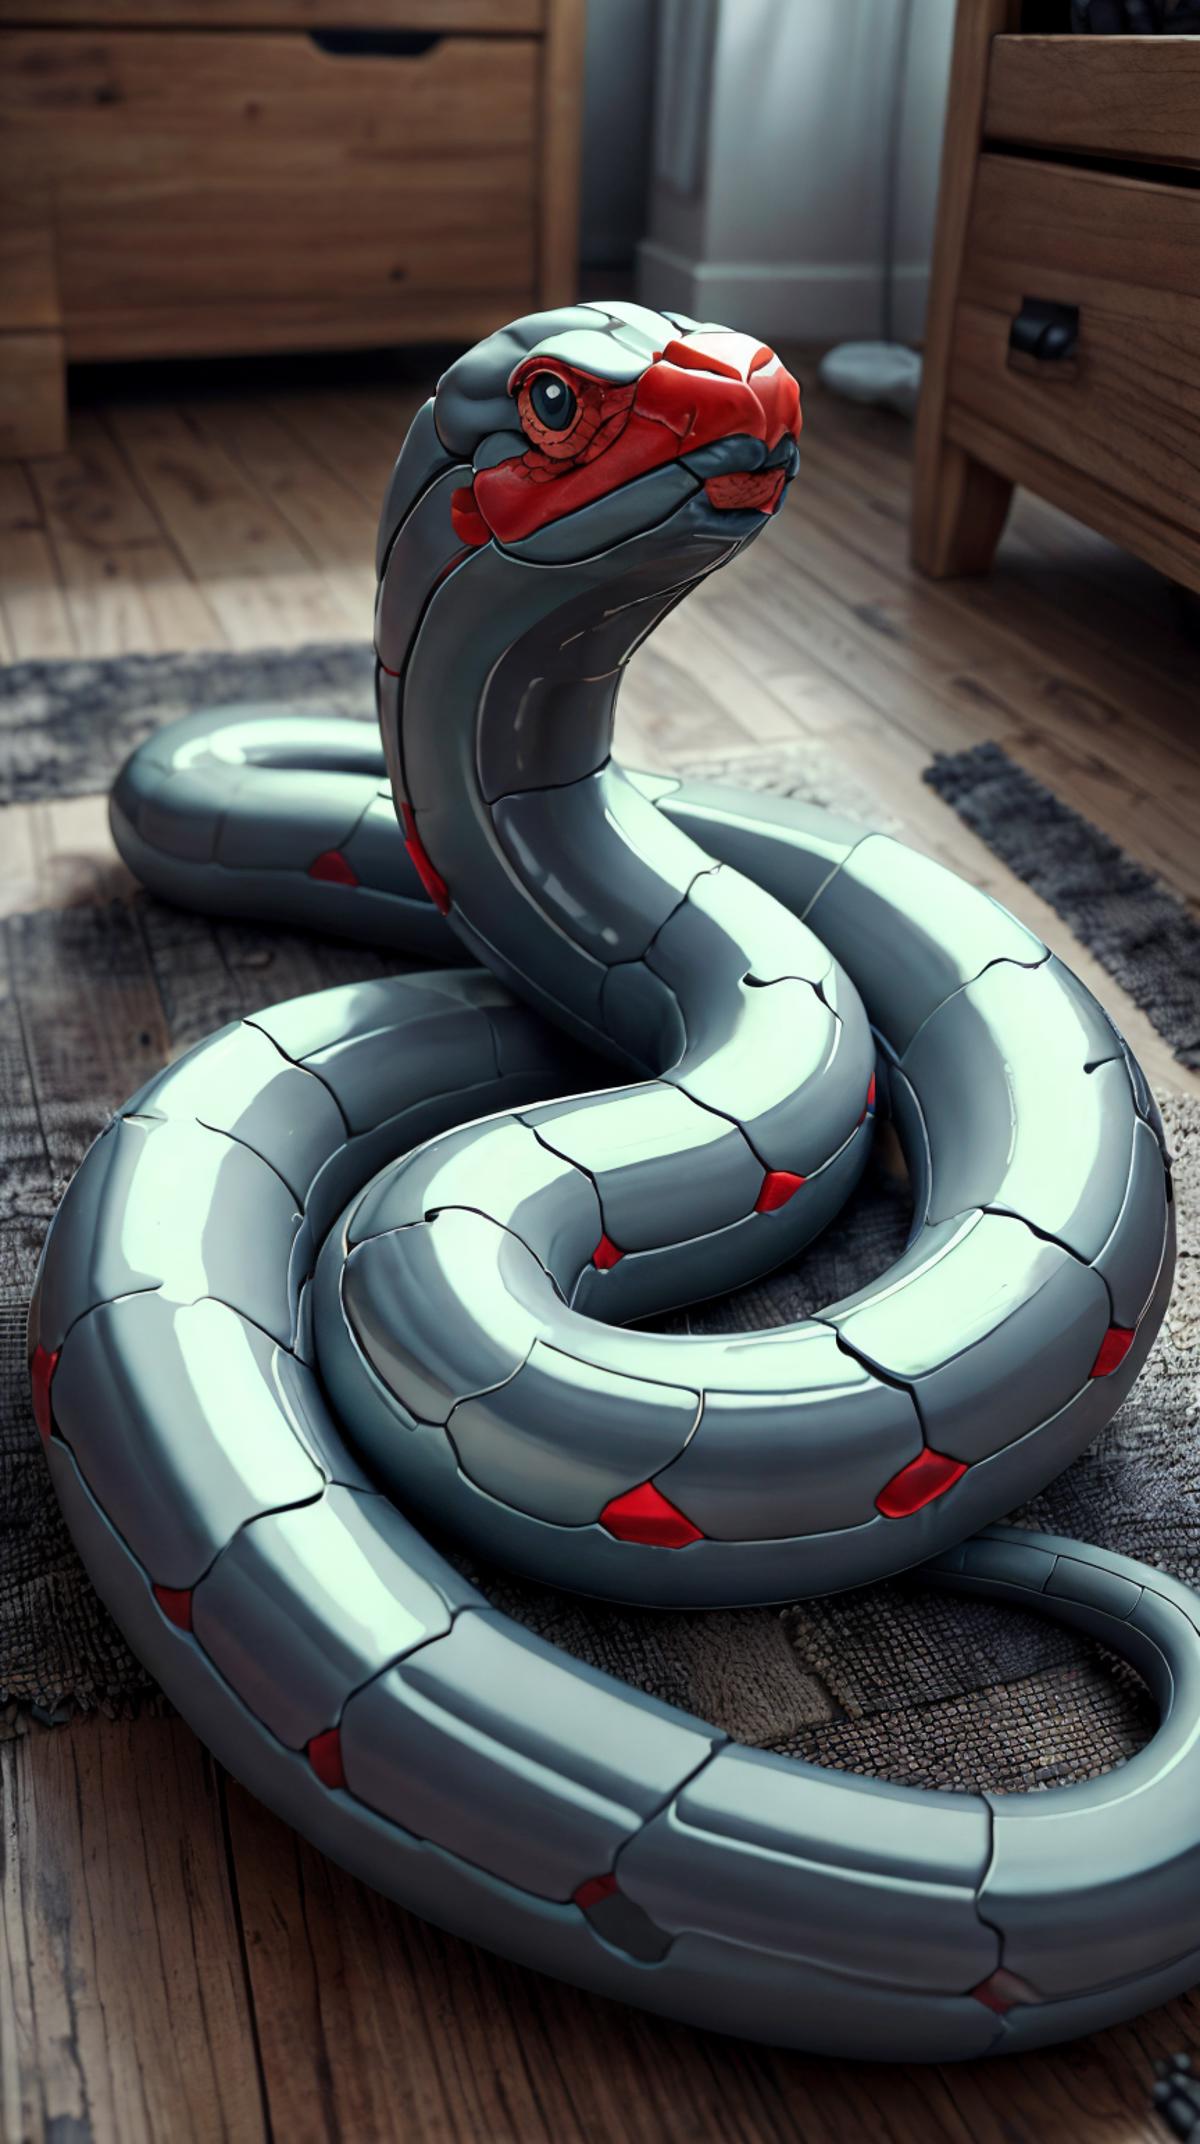 A robot snake with red eyes and red fangs made from plastic pieces.